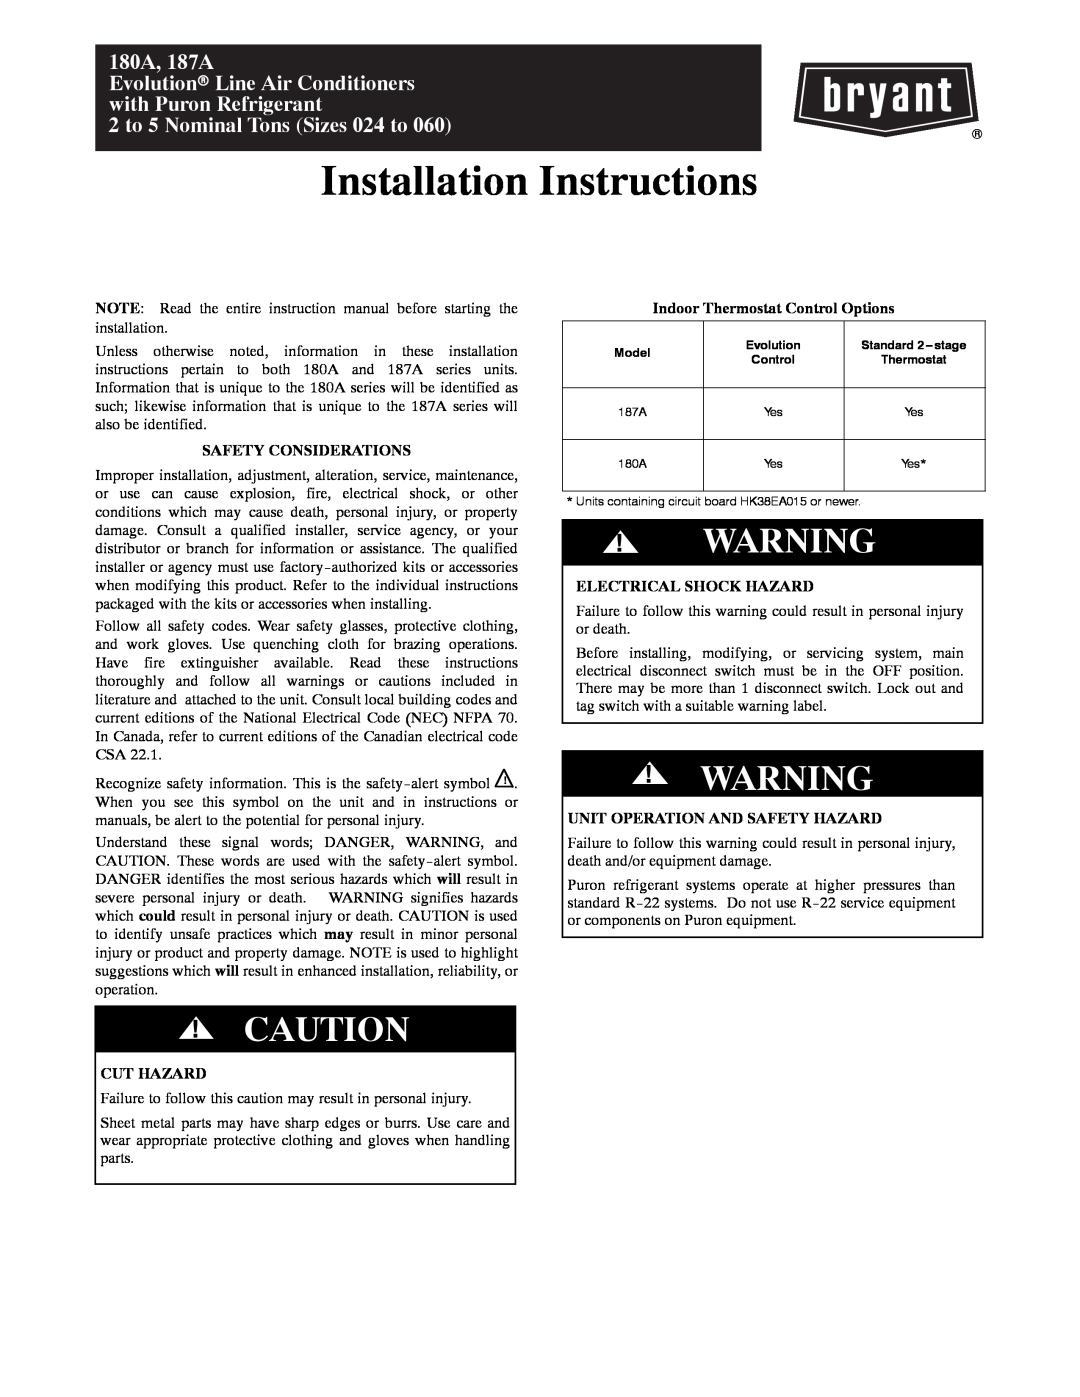 Bryant installation instructions Safety Considerations, Cut Hazard, Indoor Thermostat Control Options, 180A, 187A 